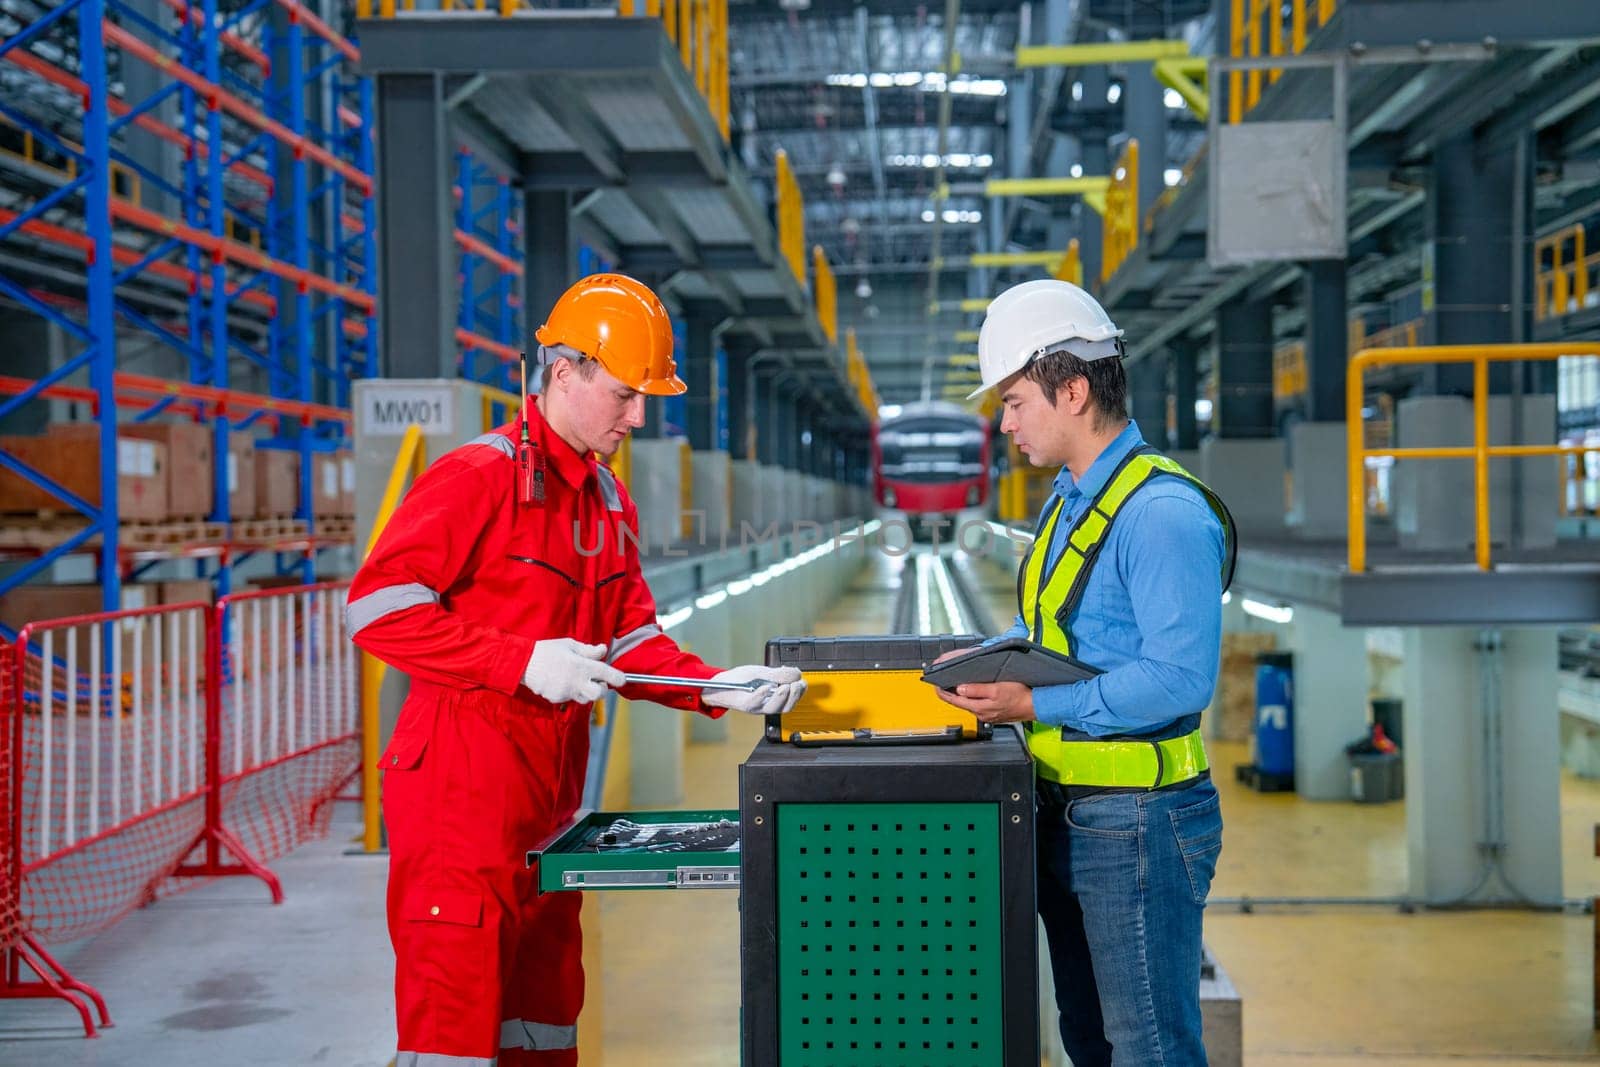 Professional technician and engineer worker discuss about tools and equipment with cabinet in front of railroad tracks of electrical or sky train in factory workplace.